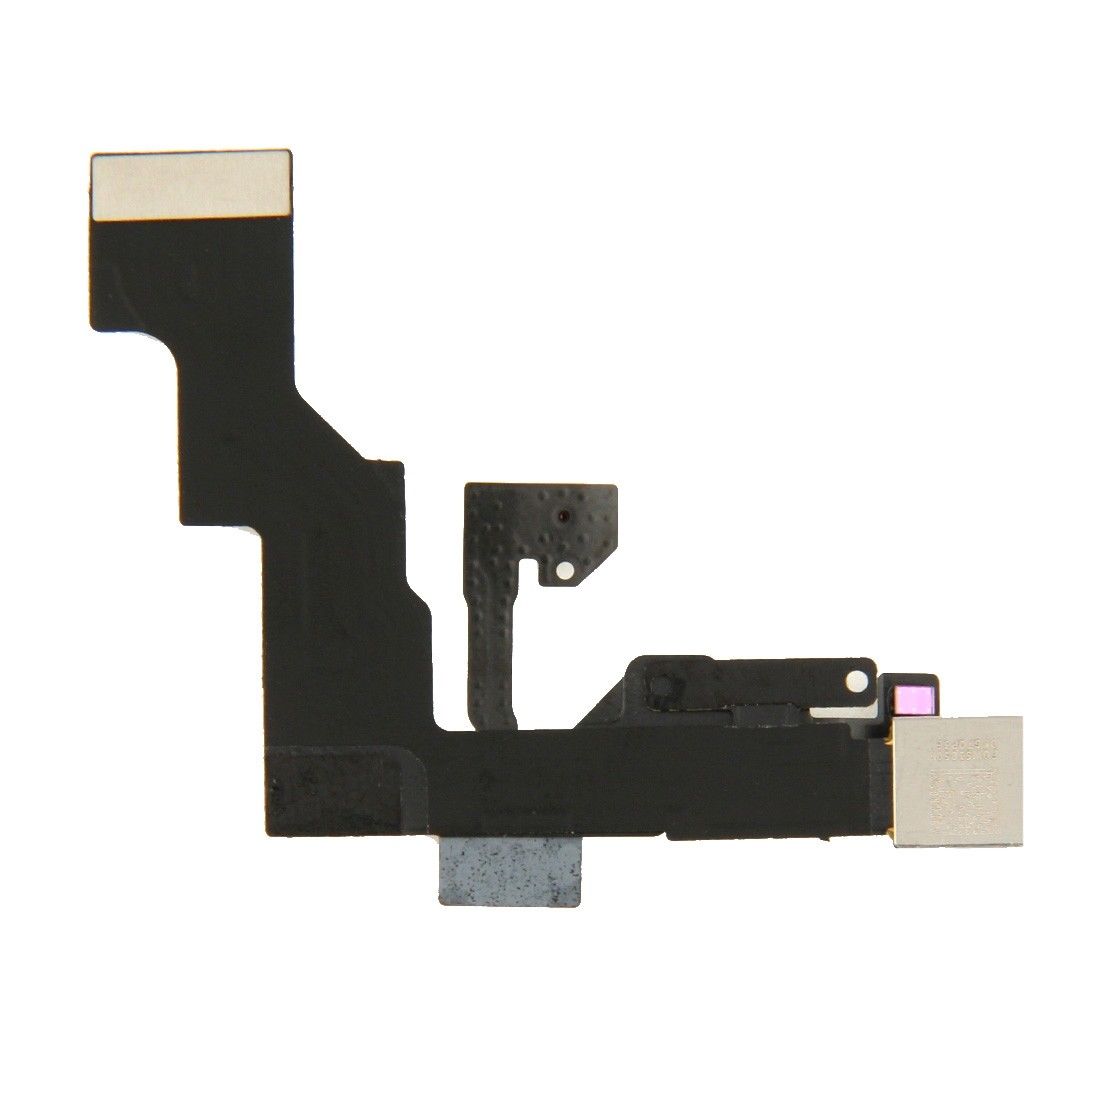 Apple iPhone 6s Plus Front camera Flex Cable for [product_price] - First Help Tech